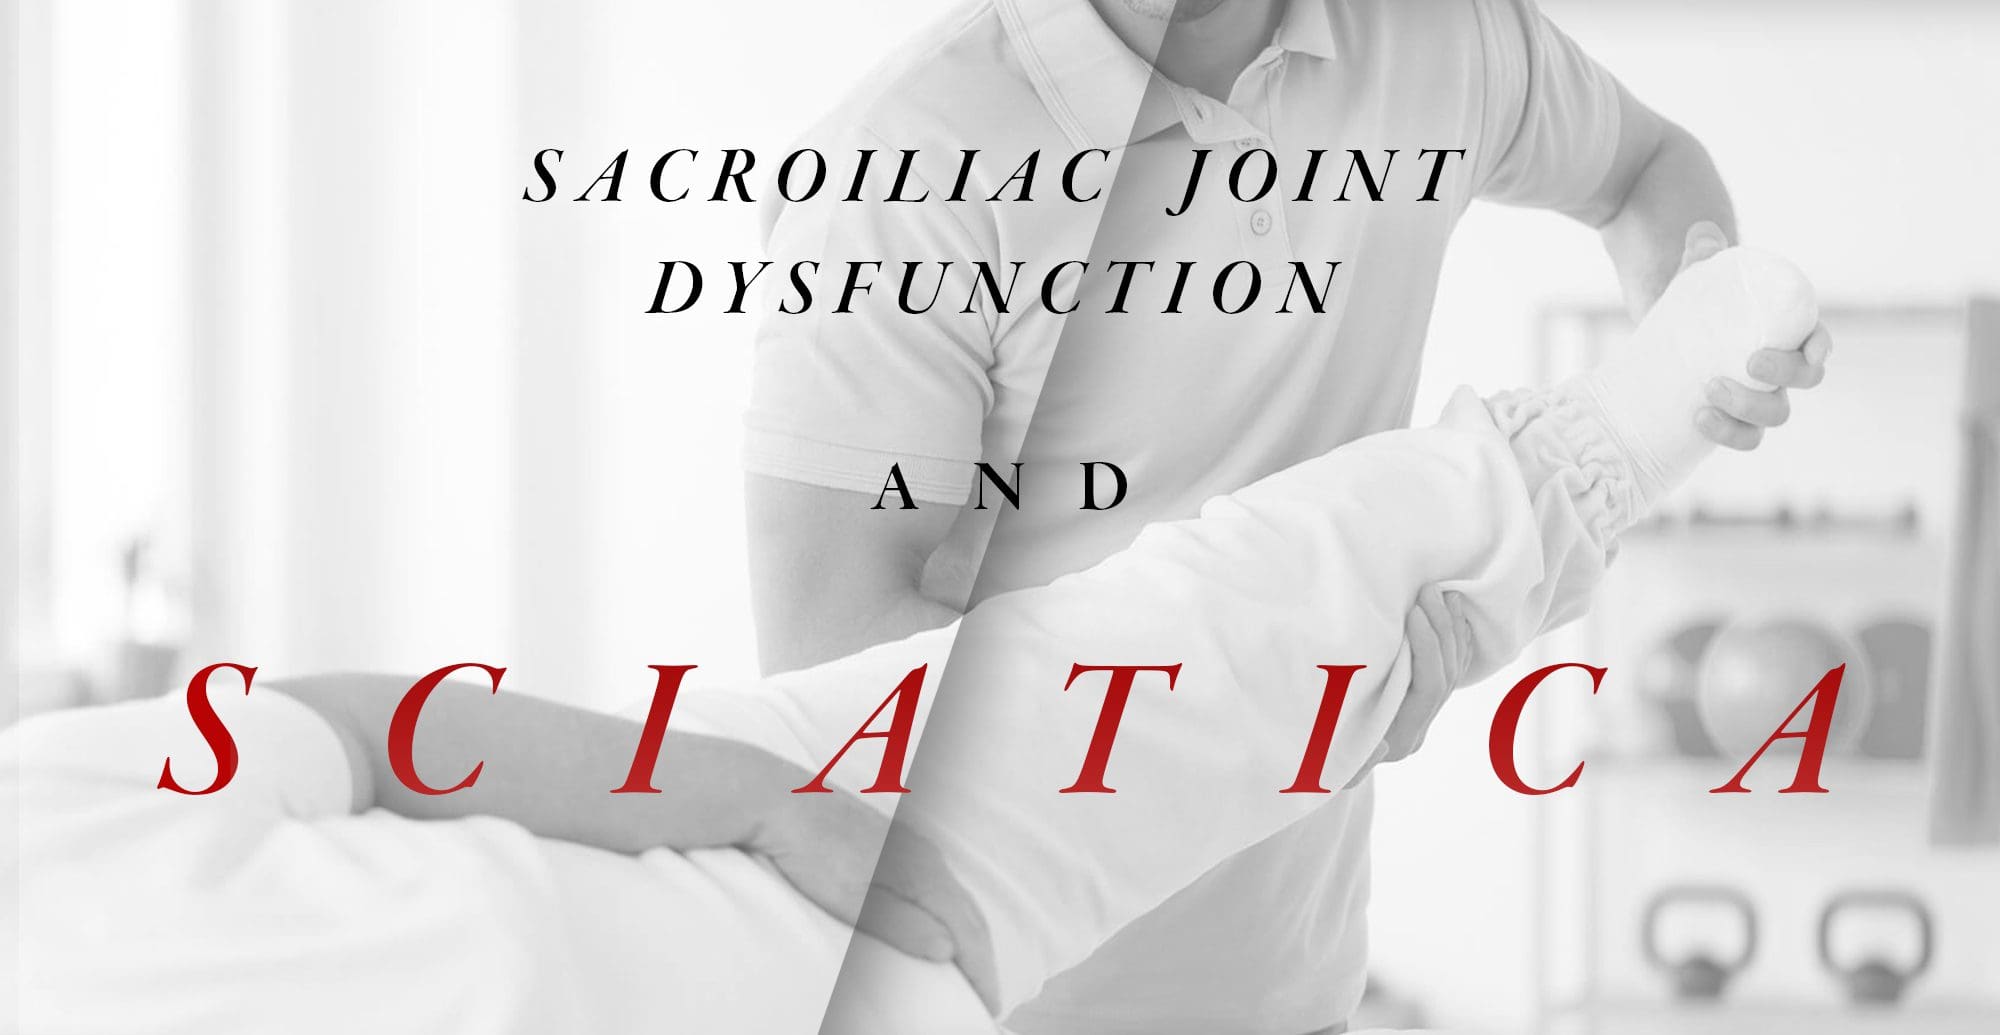 Sacroiliac Joint Dysfunction and Sciatica | El Paso, TX Chiropractor